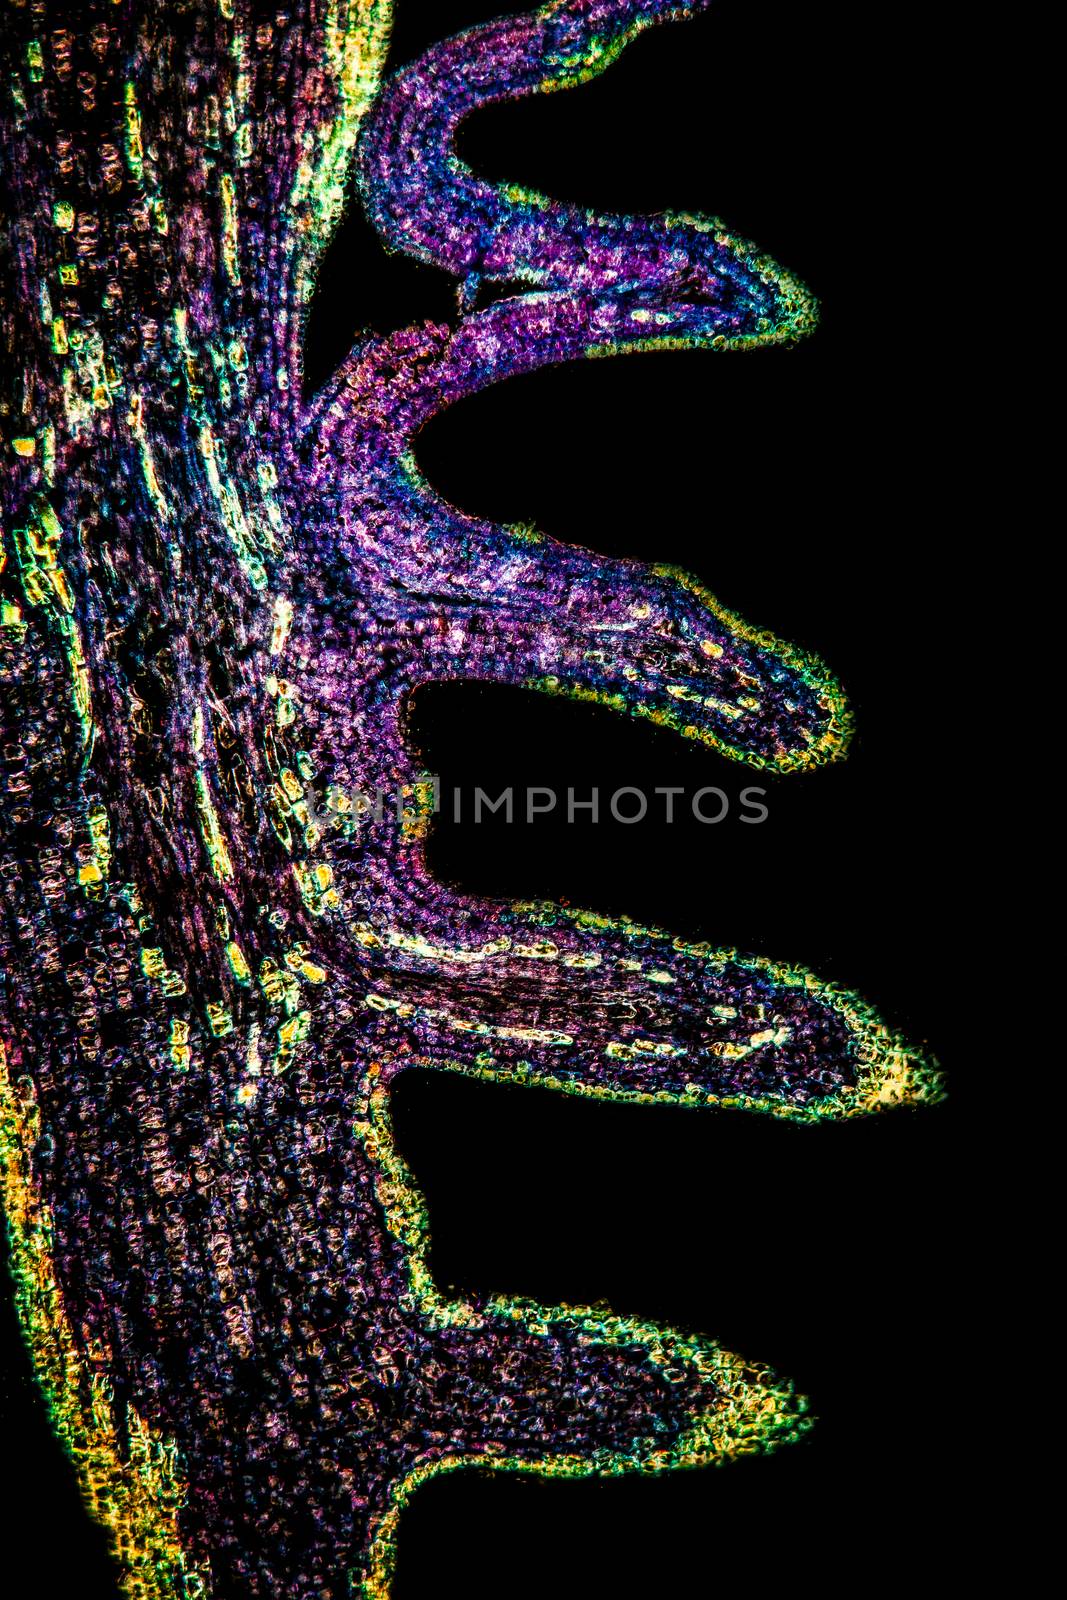 Horse chestnut buds in cross section 100x by Dr-Lange